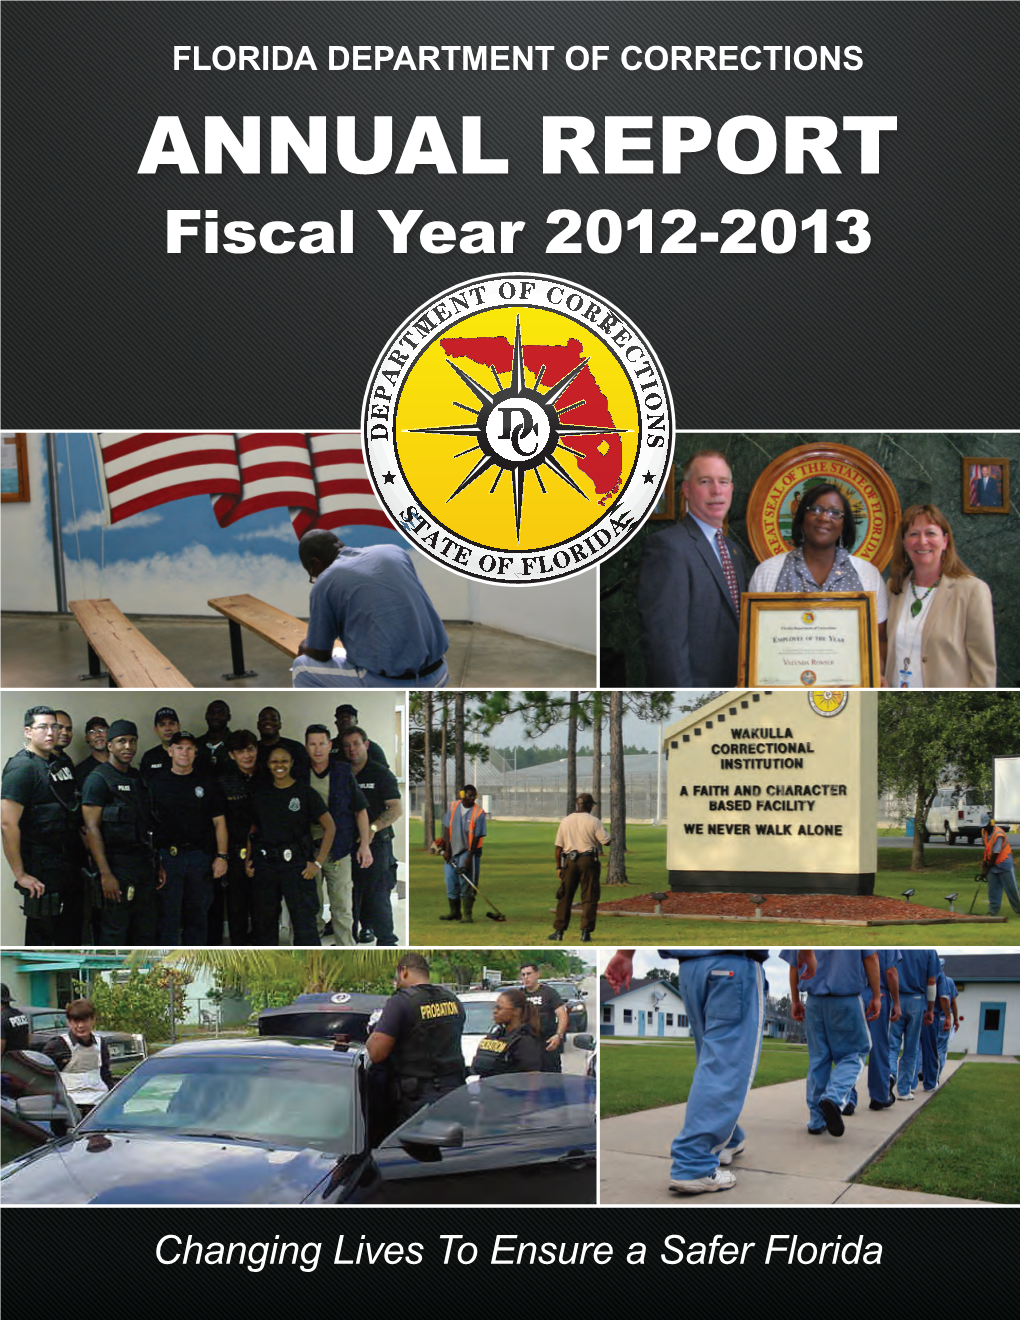 ANNUAL REPORT Fiscal Year 2012-2013